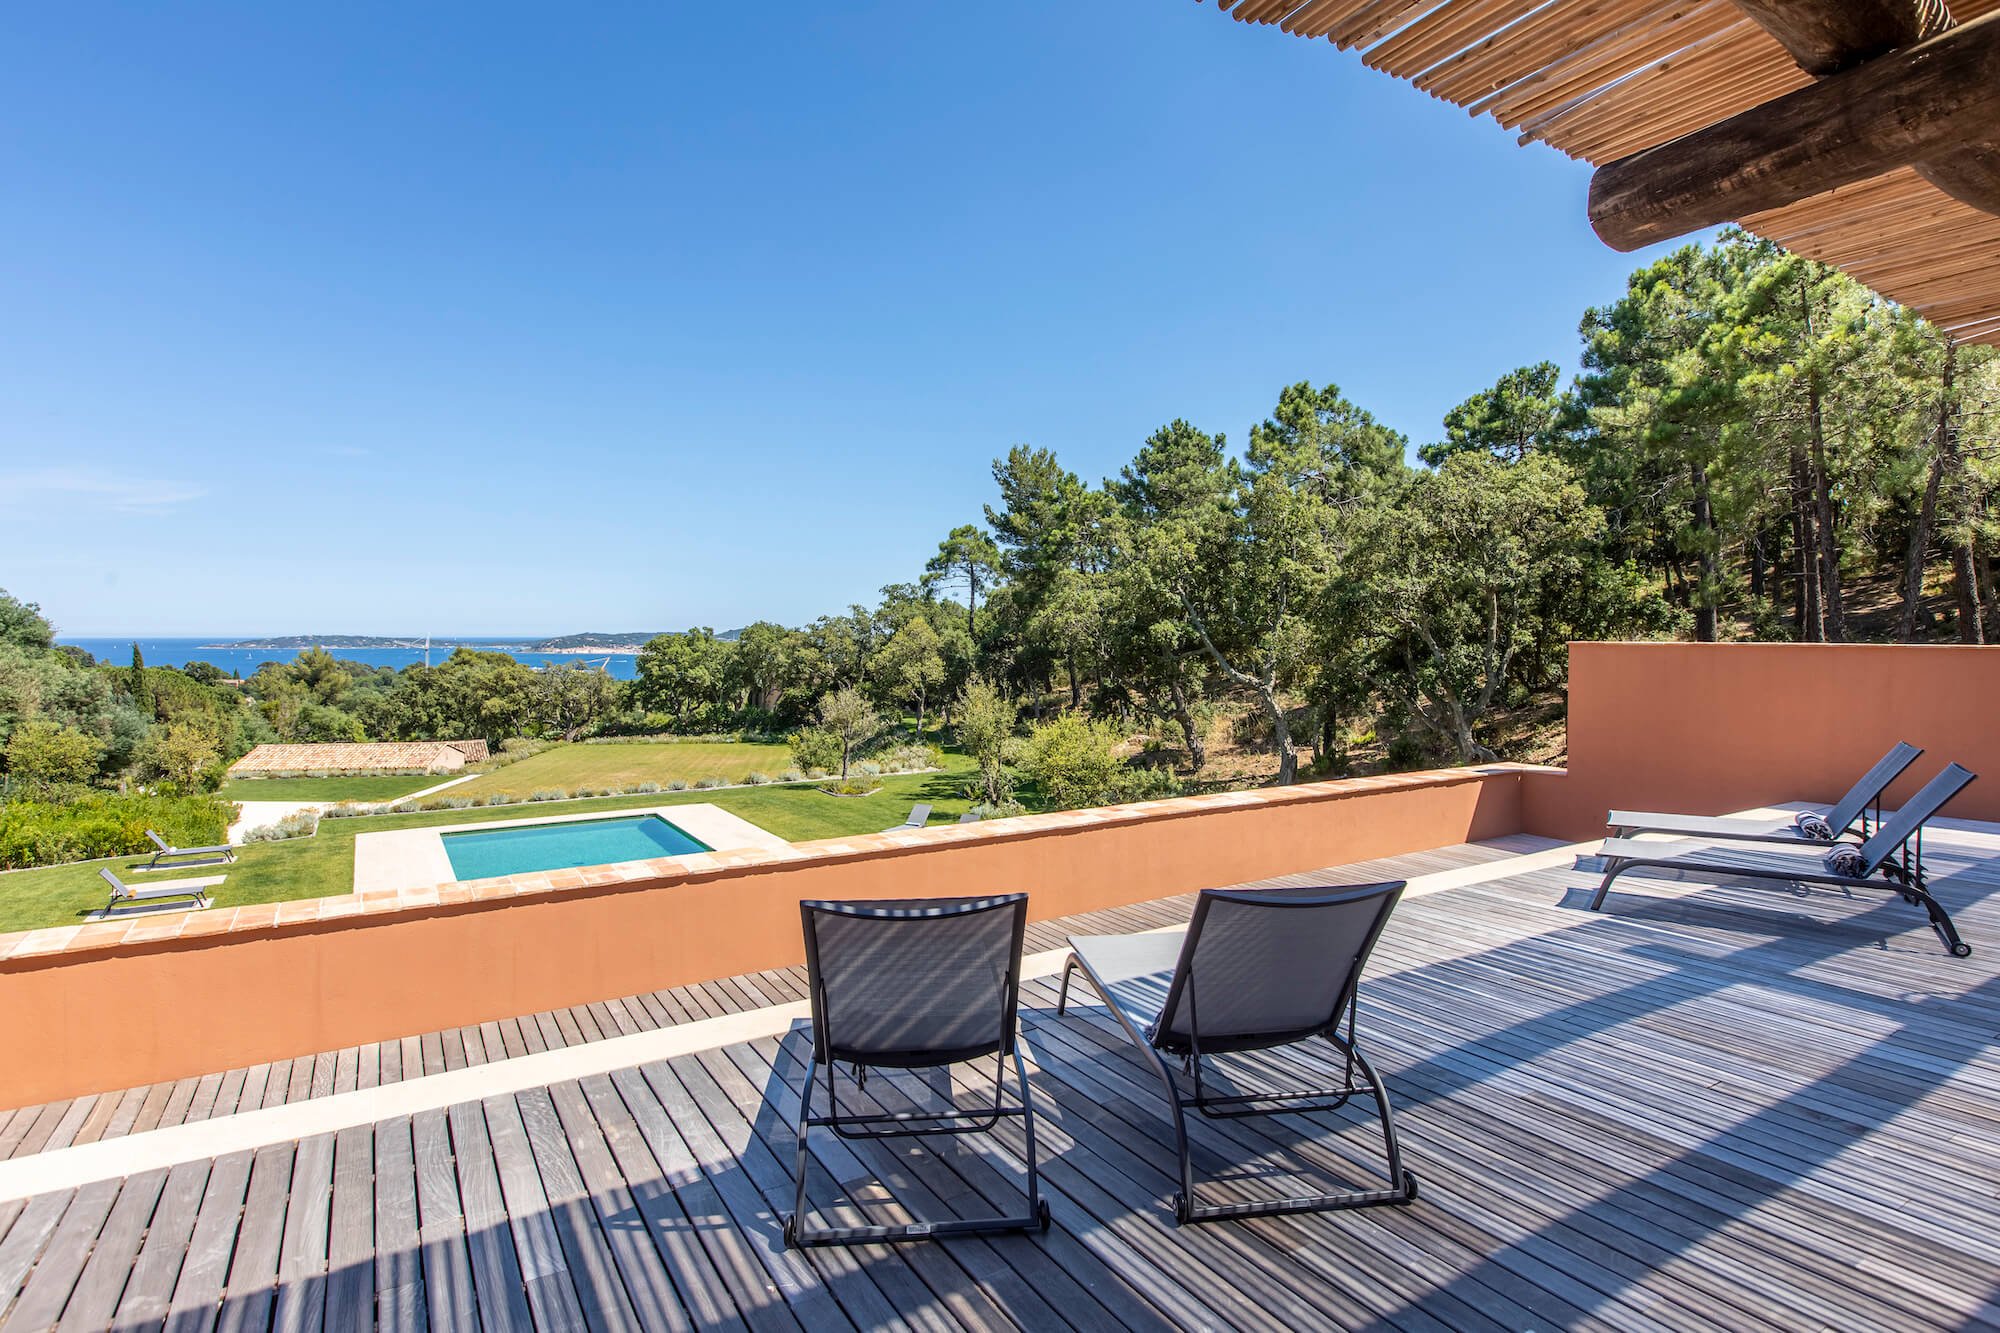 Exceptional waterfront estate for team-building in Saint-Tropez, overlooking the Mediterranean Sea 